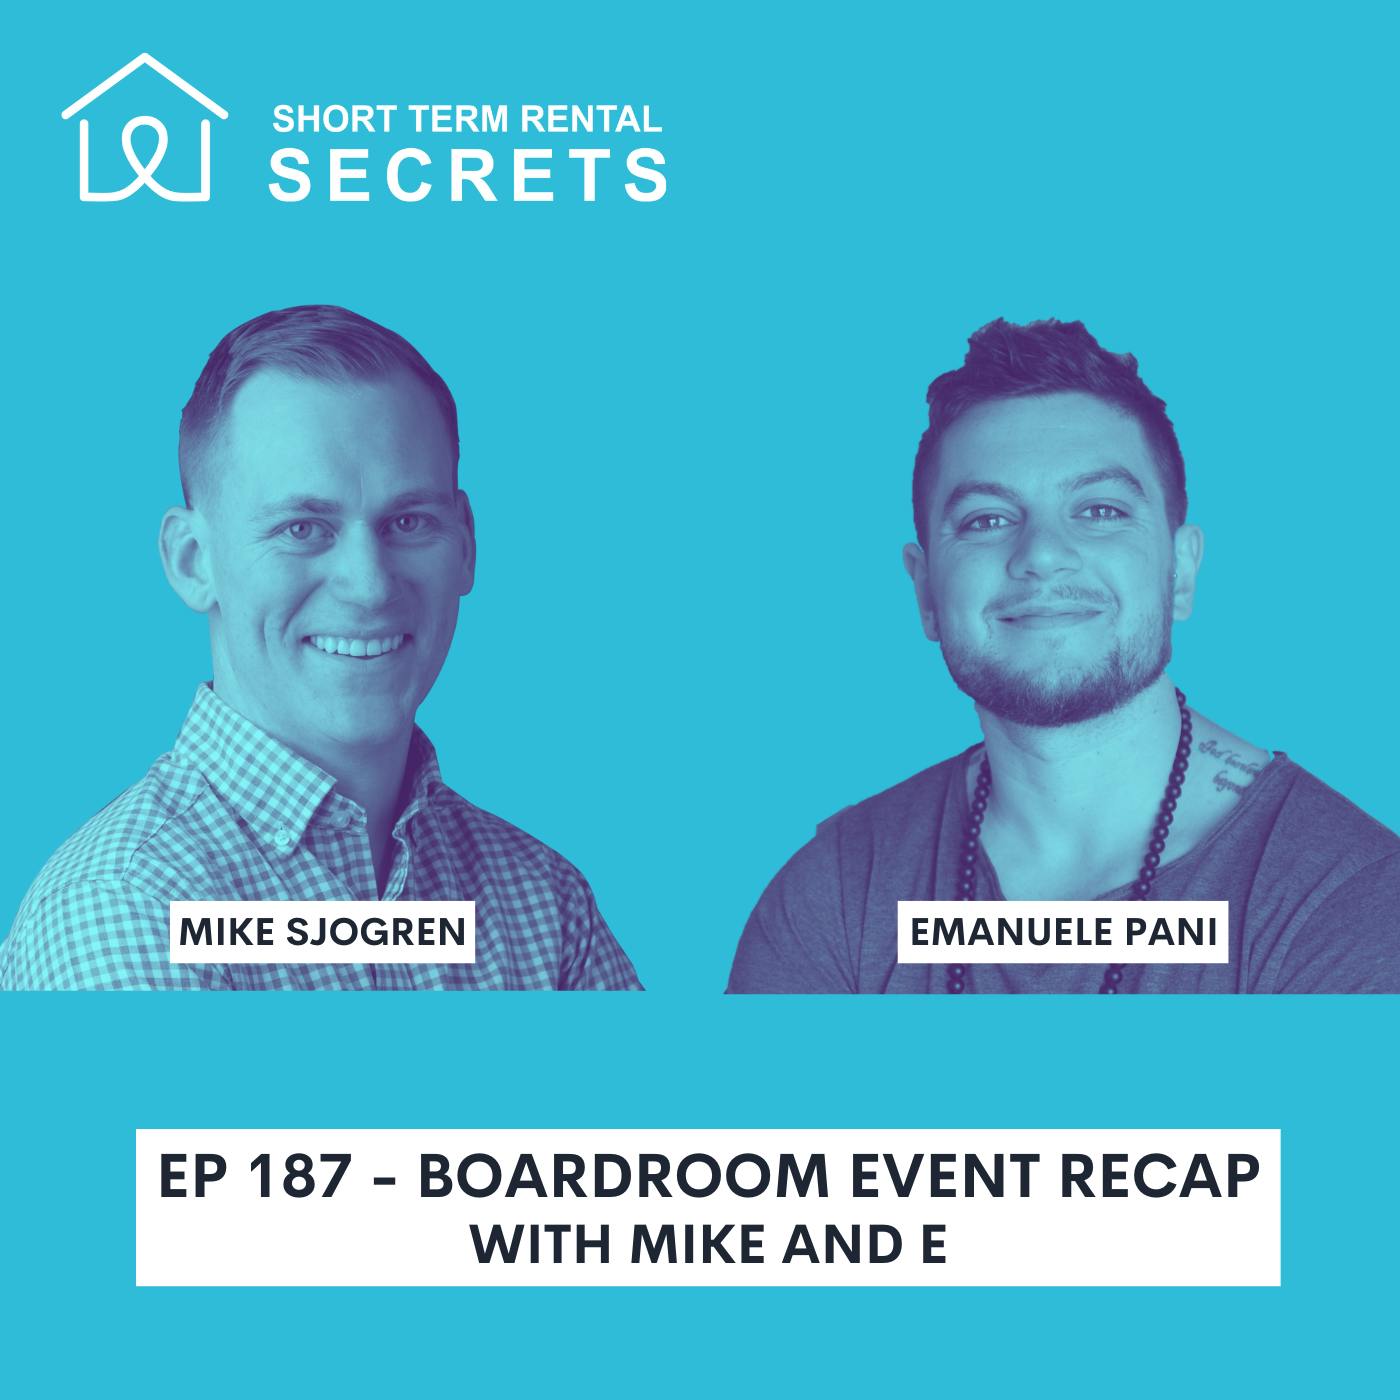 Ep 187 - Boardroom Event Recap with Mike and E